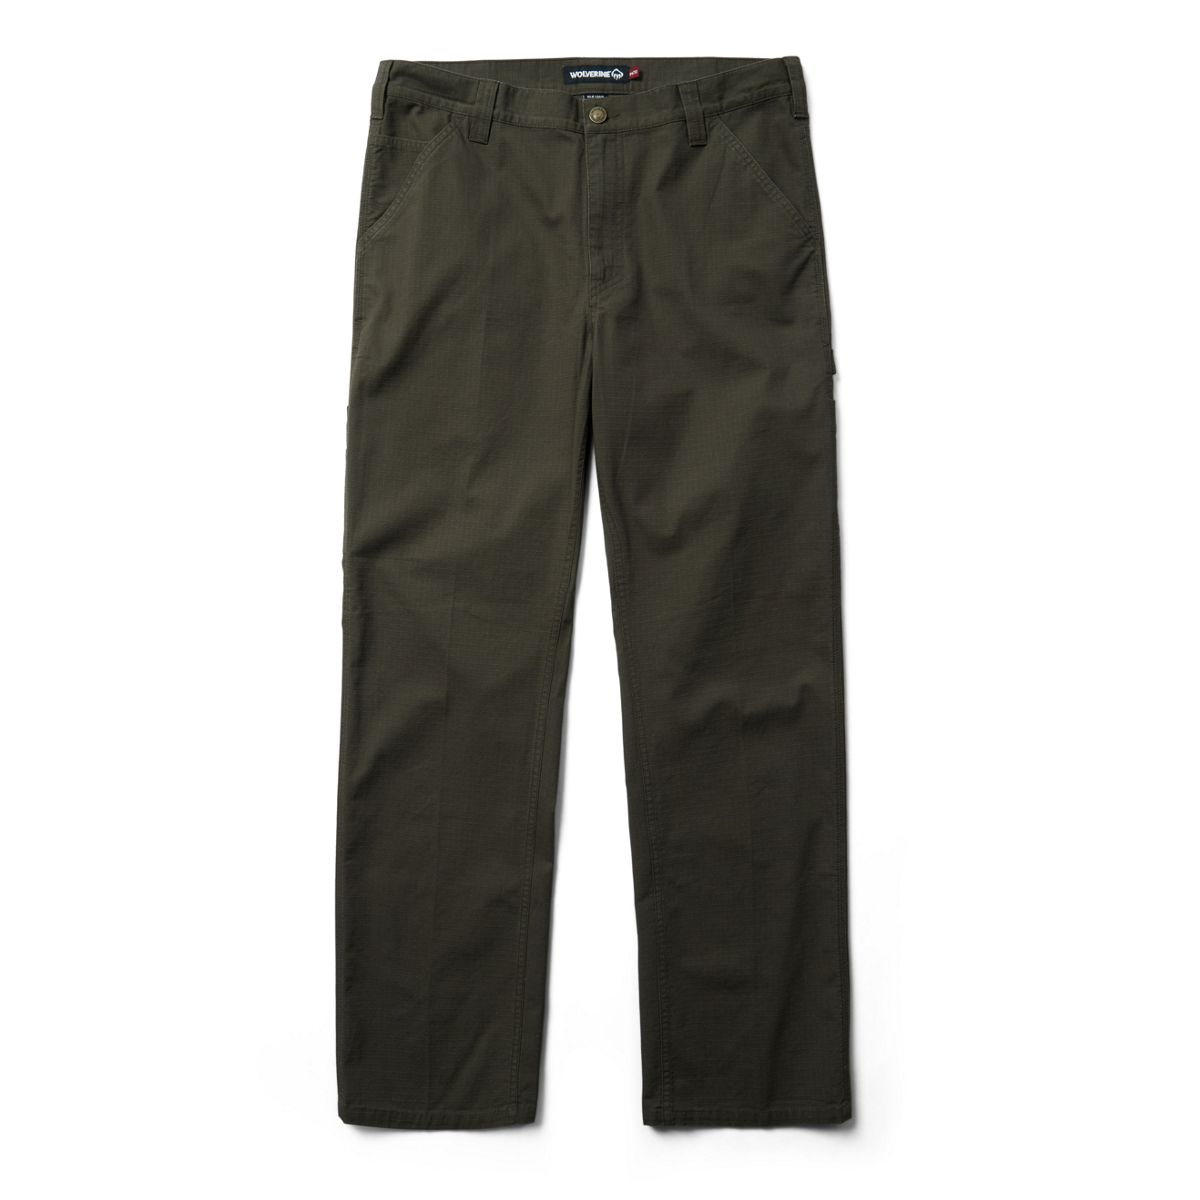  Wolverine Men's Hammerloop Cotton Duck Canvas Utility Pant,  Hickory, 44x30 : Clothing, Shoes & Jewelry